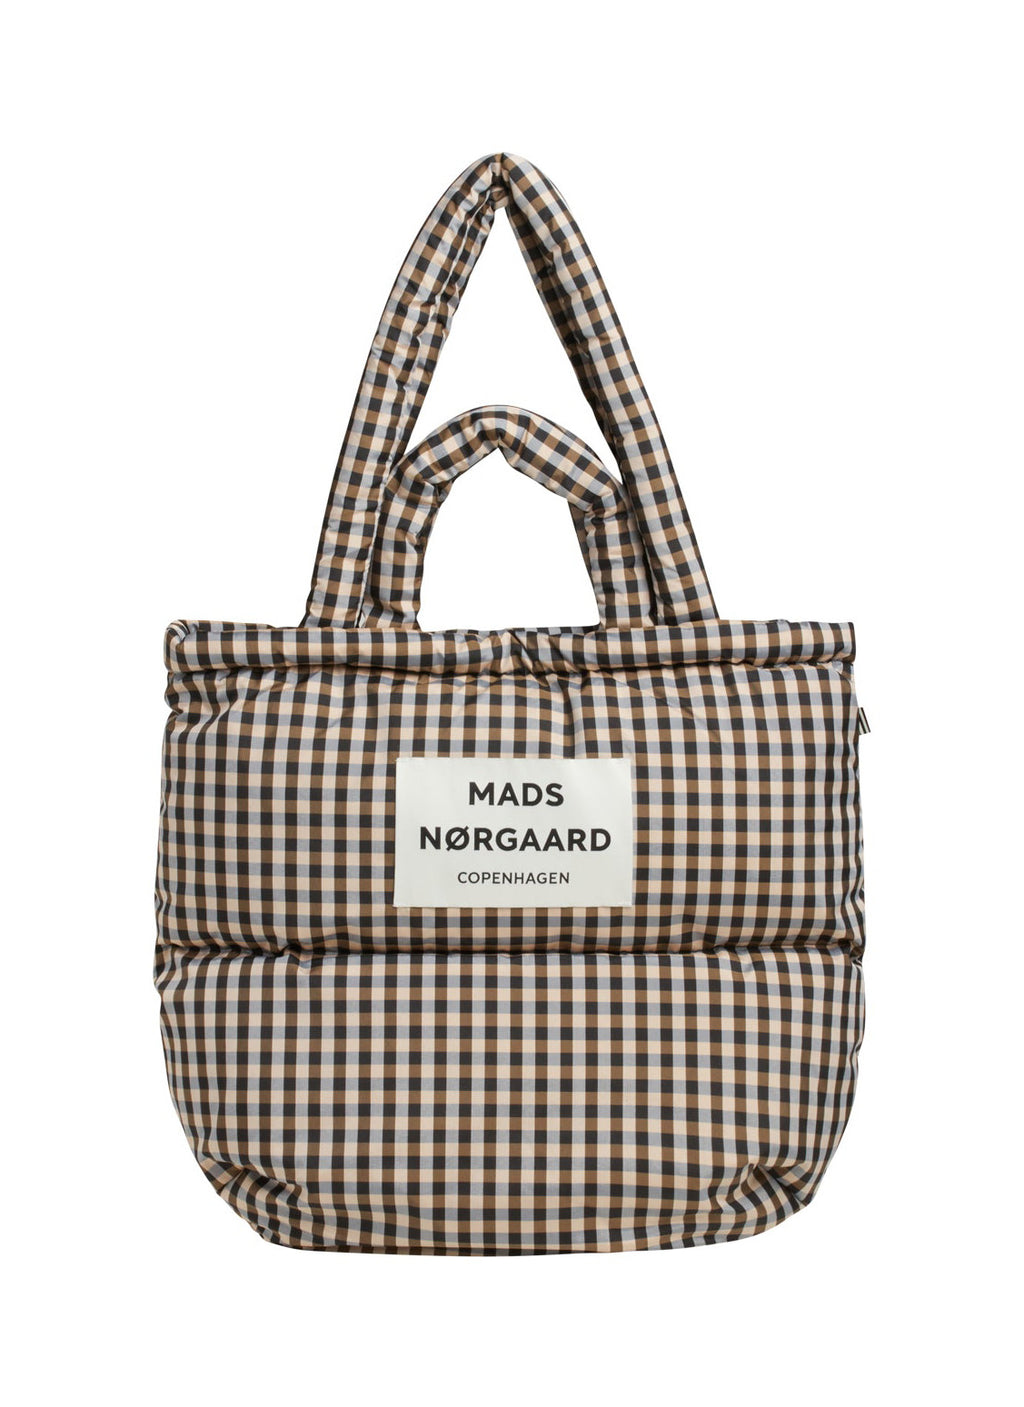 Mads Norgaard Check Club Pillow Bag - White Feather Boutique